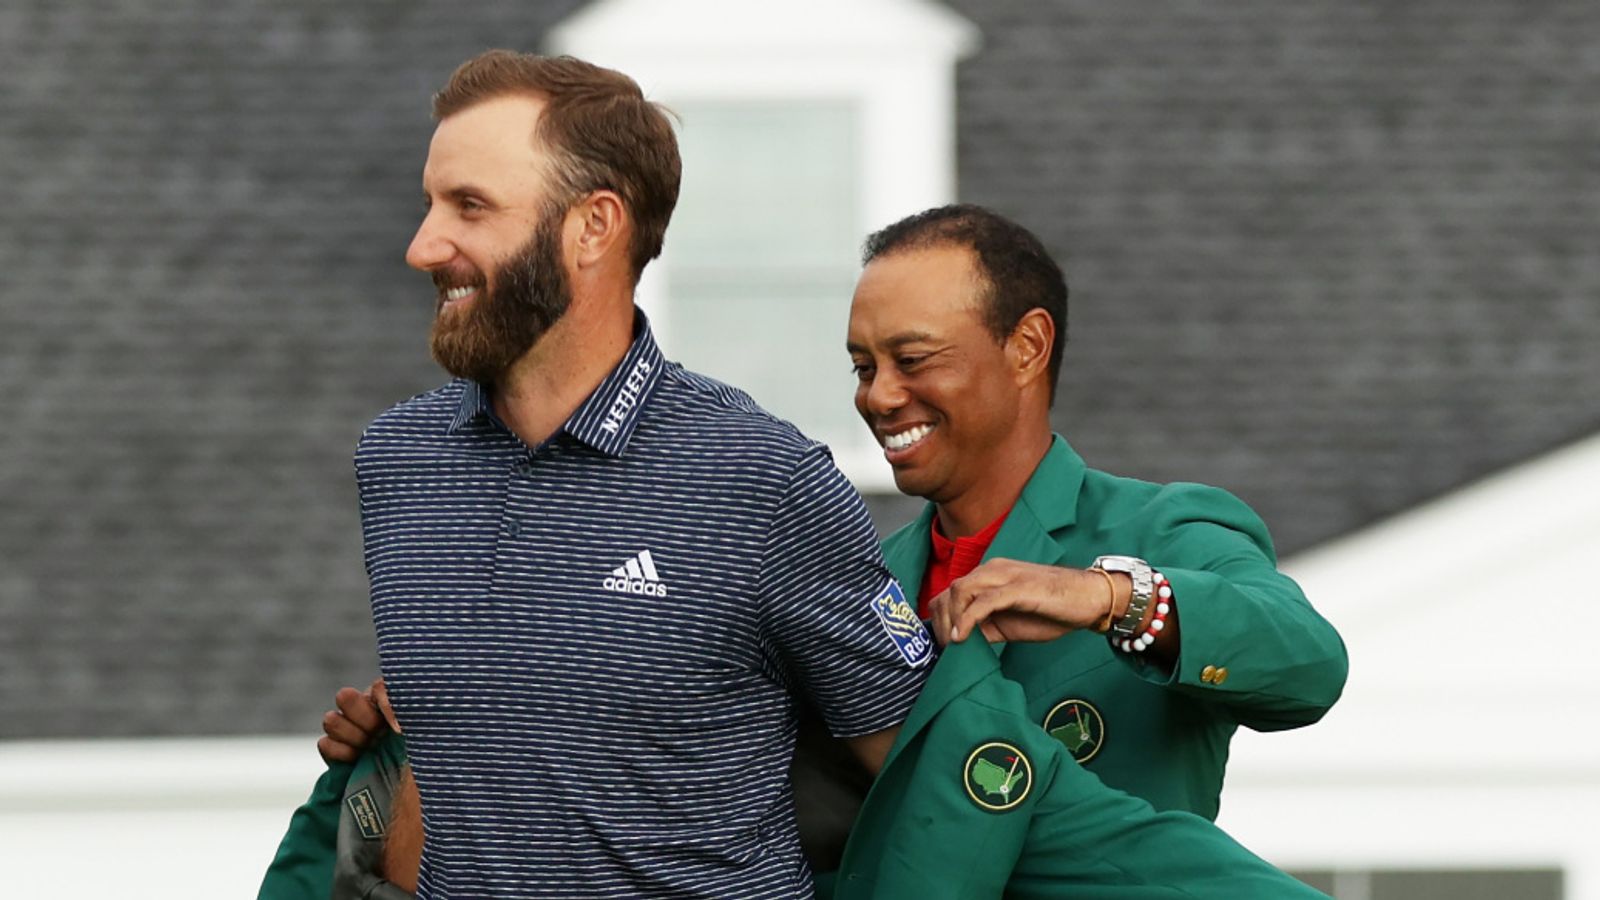 Dustin Johnson Masters Odds: +6600 To Win The 2023 Masters